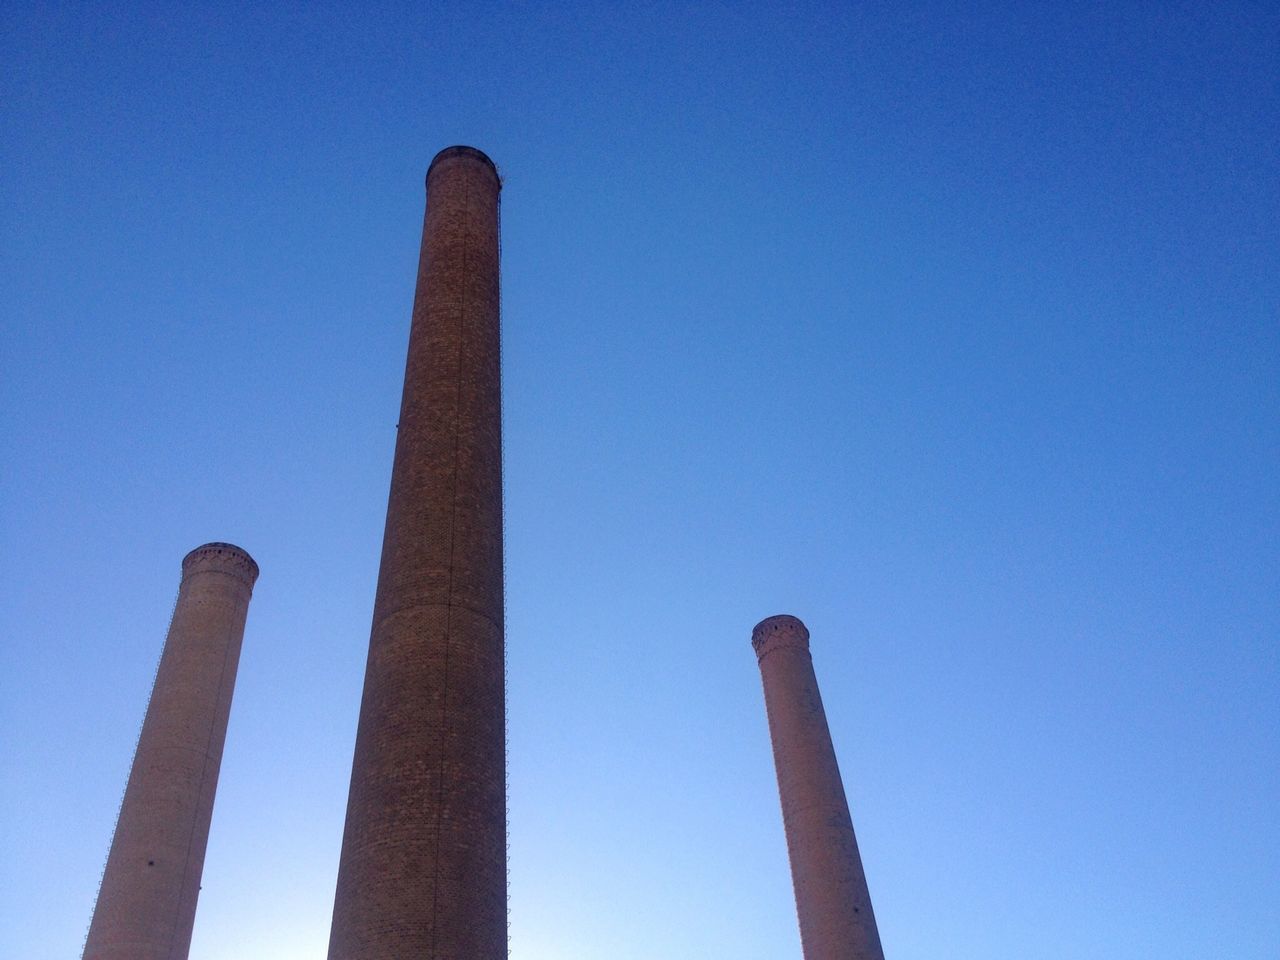 low angle view, clear sky, blue, smoke stack, built structure, industry, copy space, tall - high, factory, pole, architecture, no people, day, outdoors, tower, metal, sky, tall, architectural column, wooden post